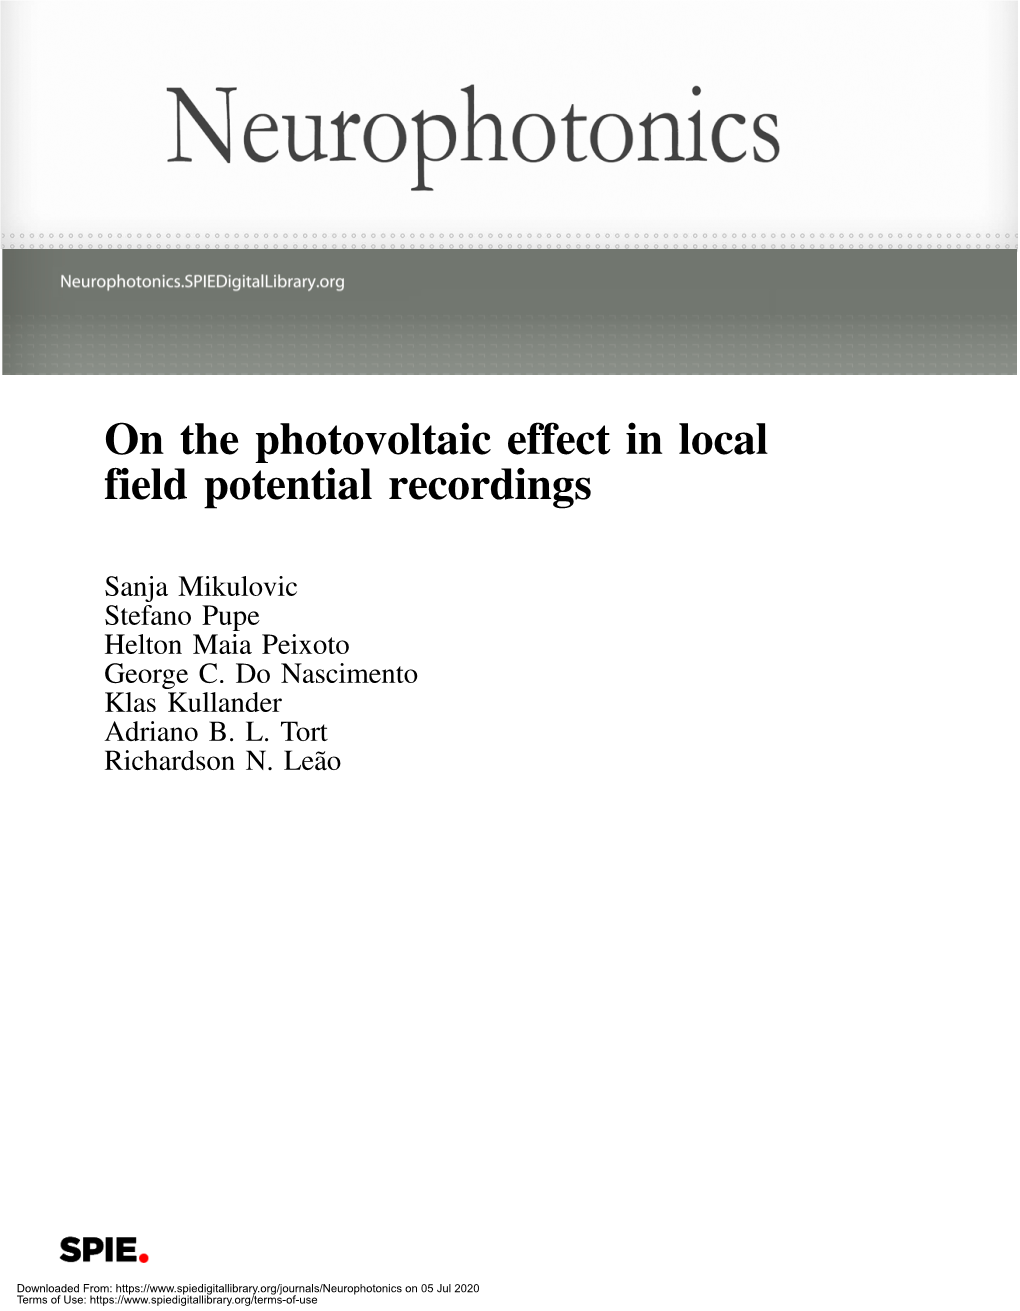 On the Photovoltaic Effect in Local Field Potential Recordings